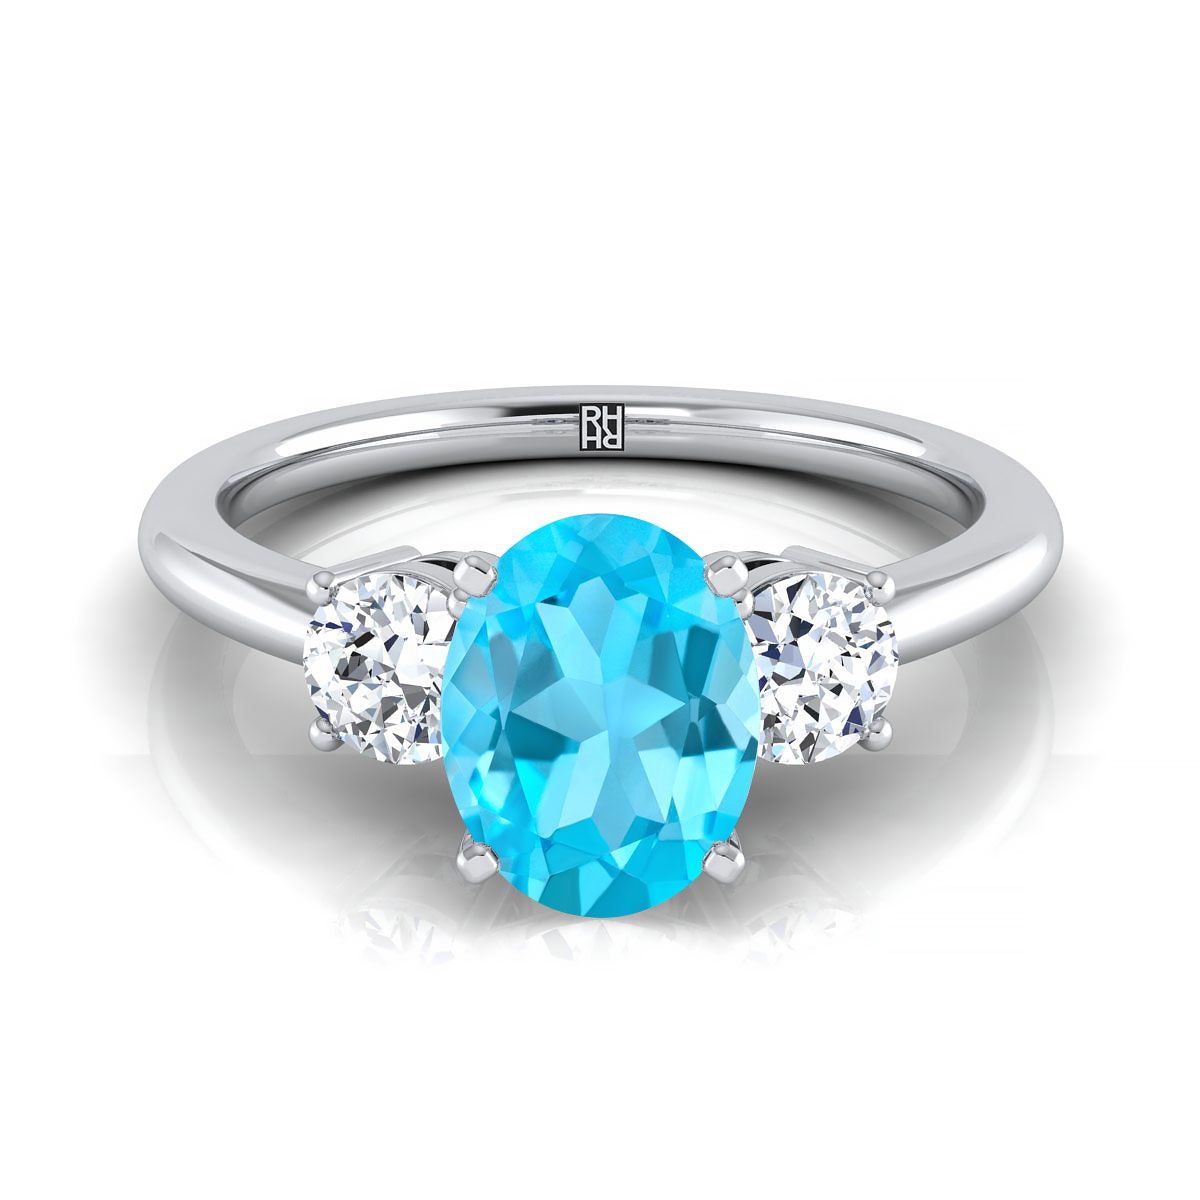 18K White Gold Oval Swiss Blue Topaz Perfectly Matched Round Three Stone Diamond Engagement Ring -1/4ctw